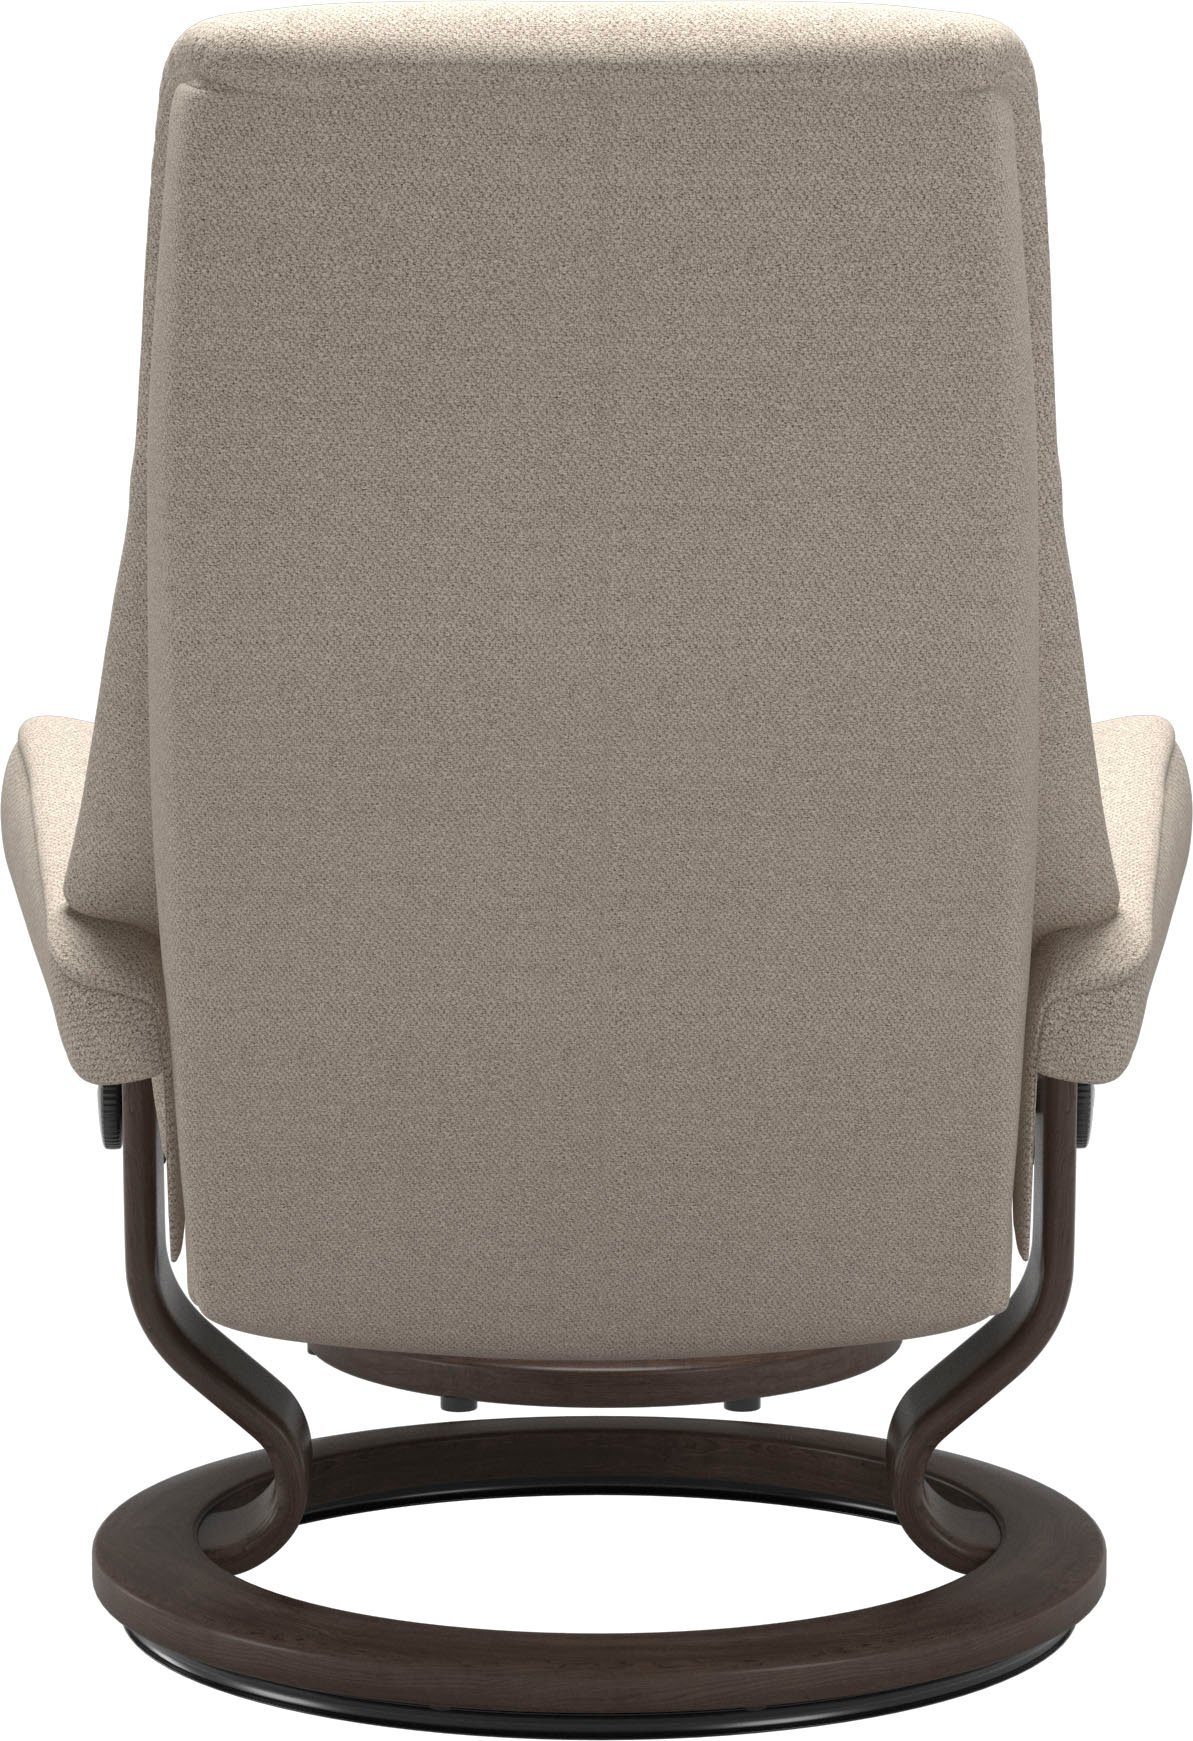 Classic mit Stressless® View, L,Gestell Base, Größe Wenge Relaxsessel